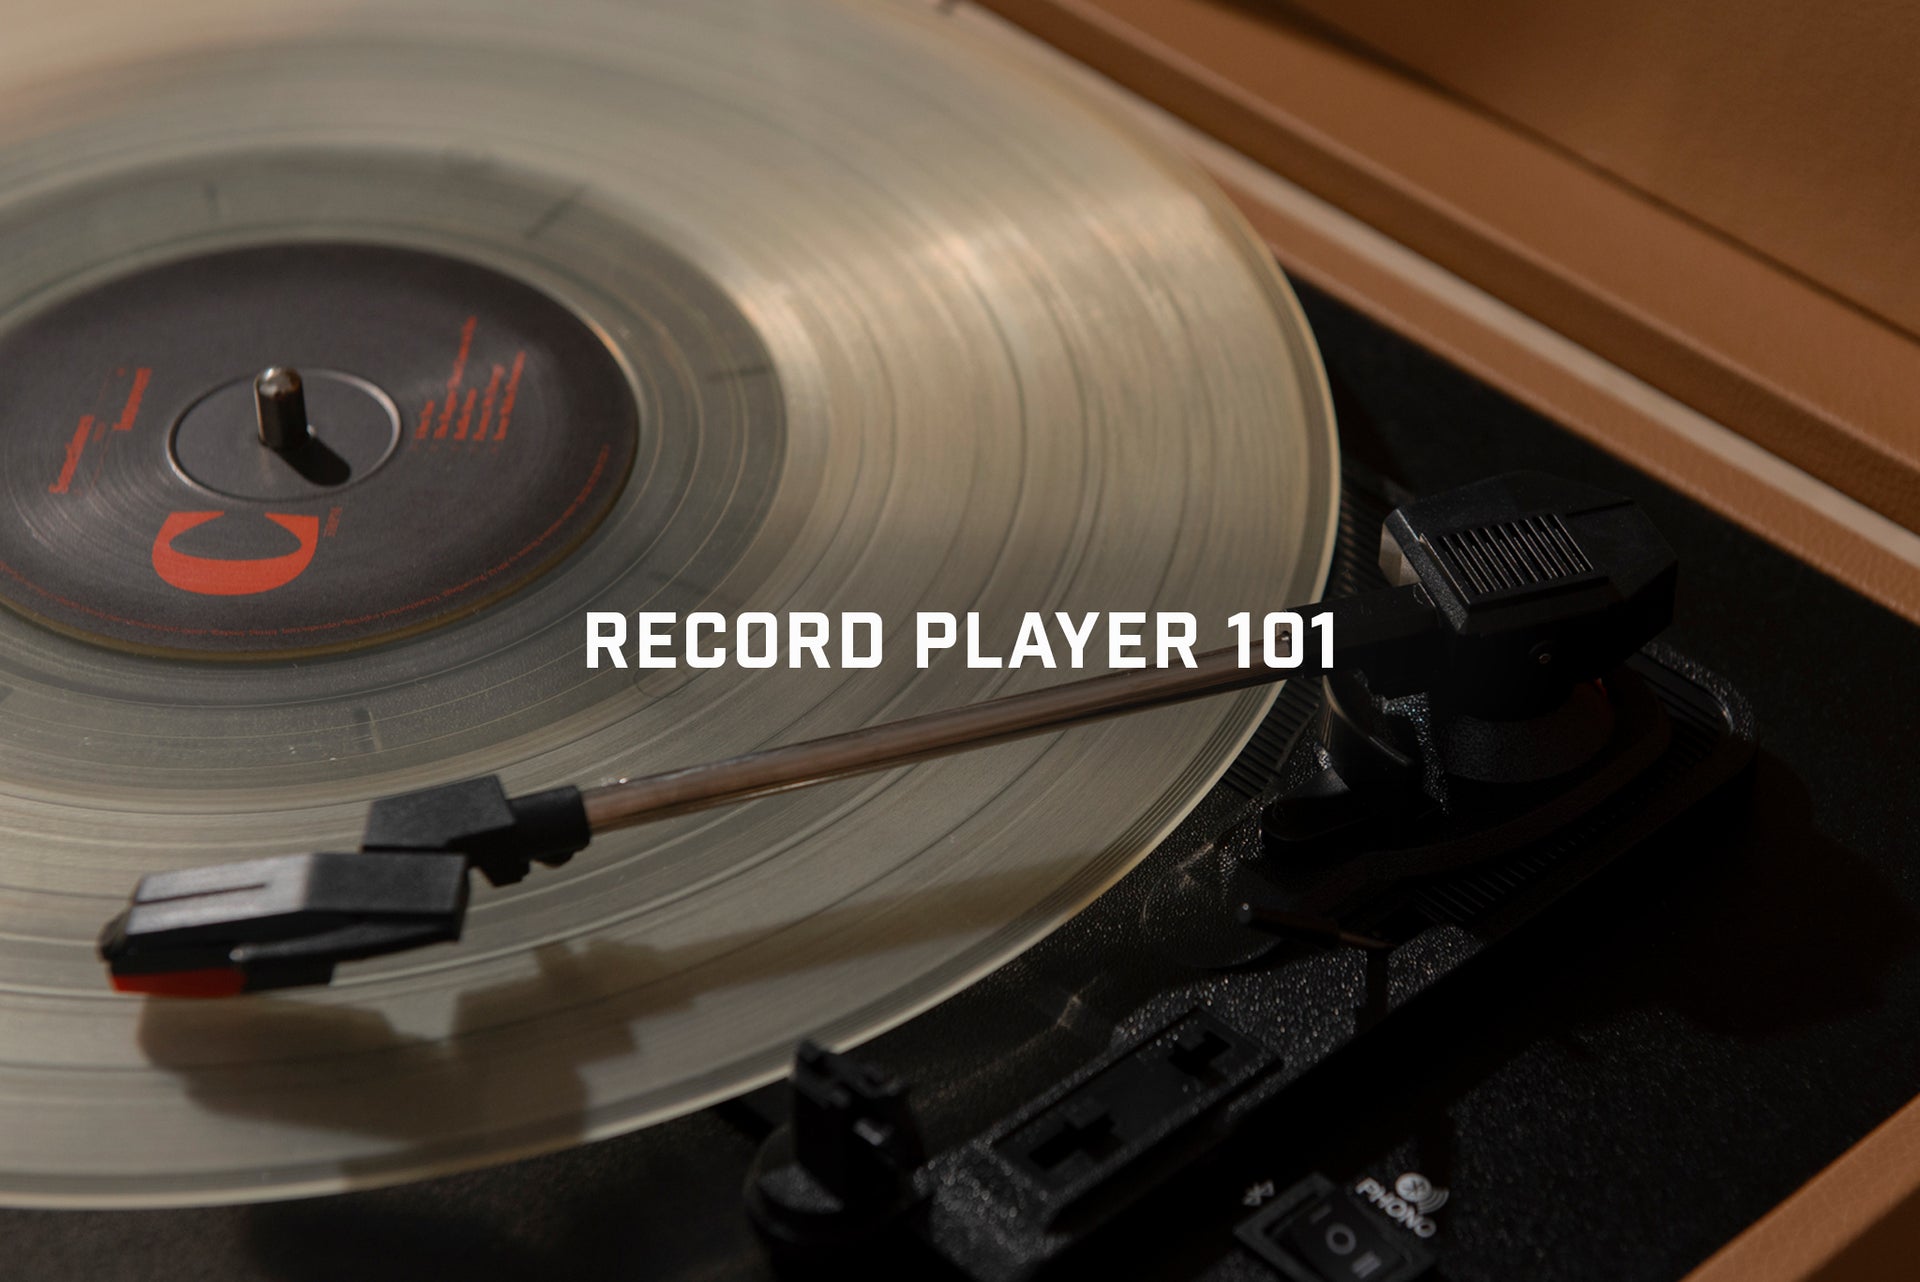 3 things you need to know about the needle of your record player